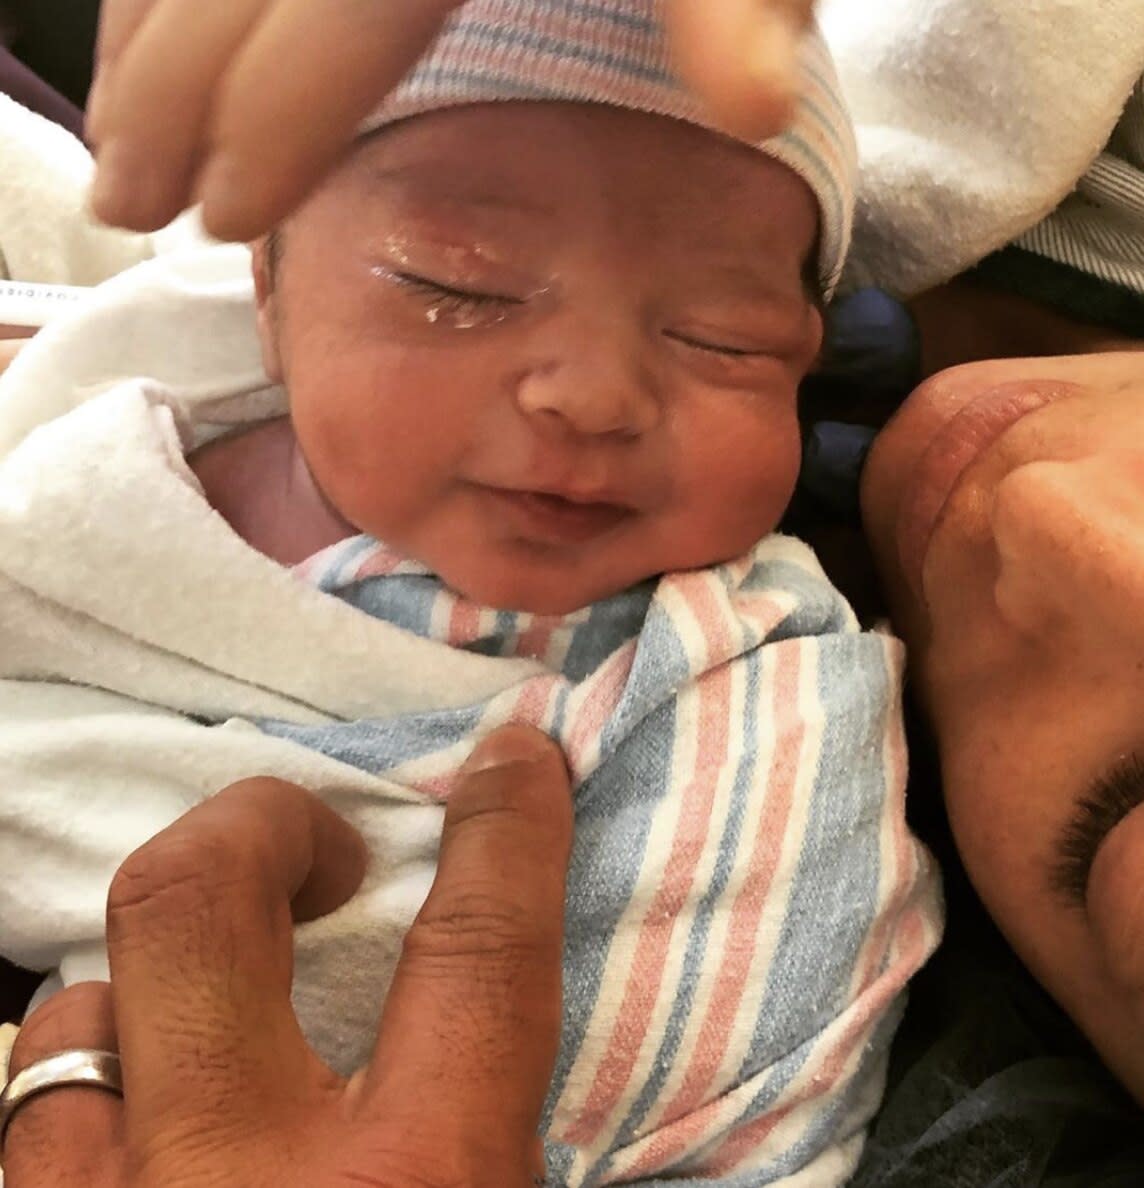 Mario Lopez and wife Courtney welcome a new baby boy Santino Rafael Lopez on July 8, 2019. "It's a BOY!!!! Healthy, beautiful baby boy...Mrs. Lopez came through like a Champ!"